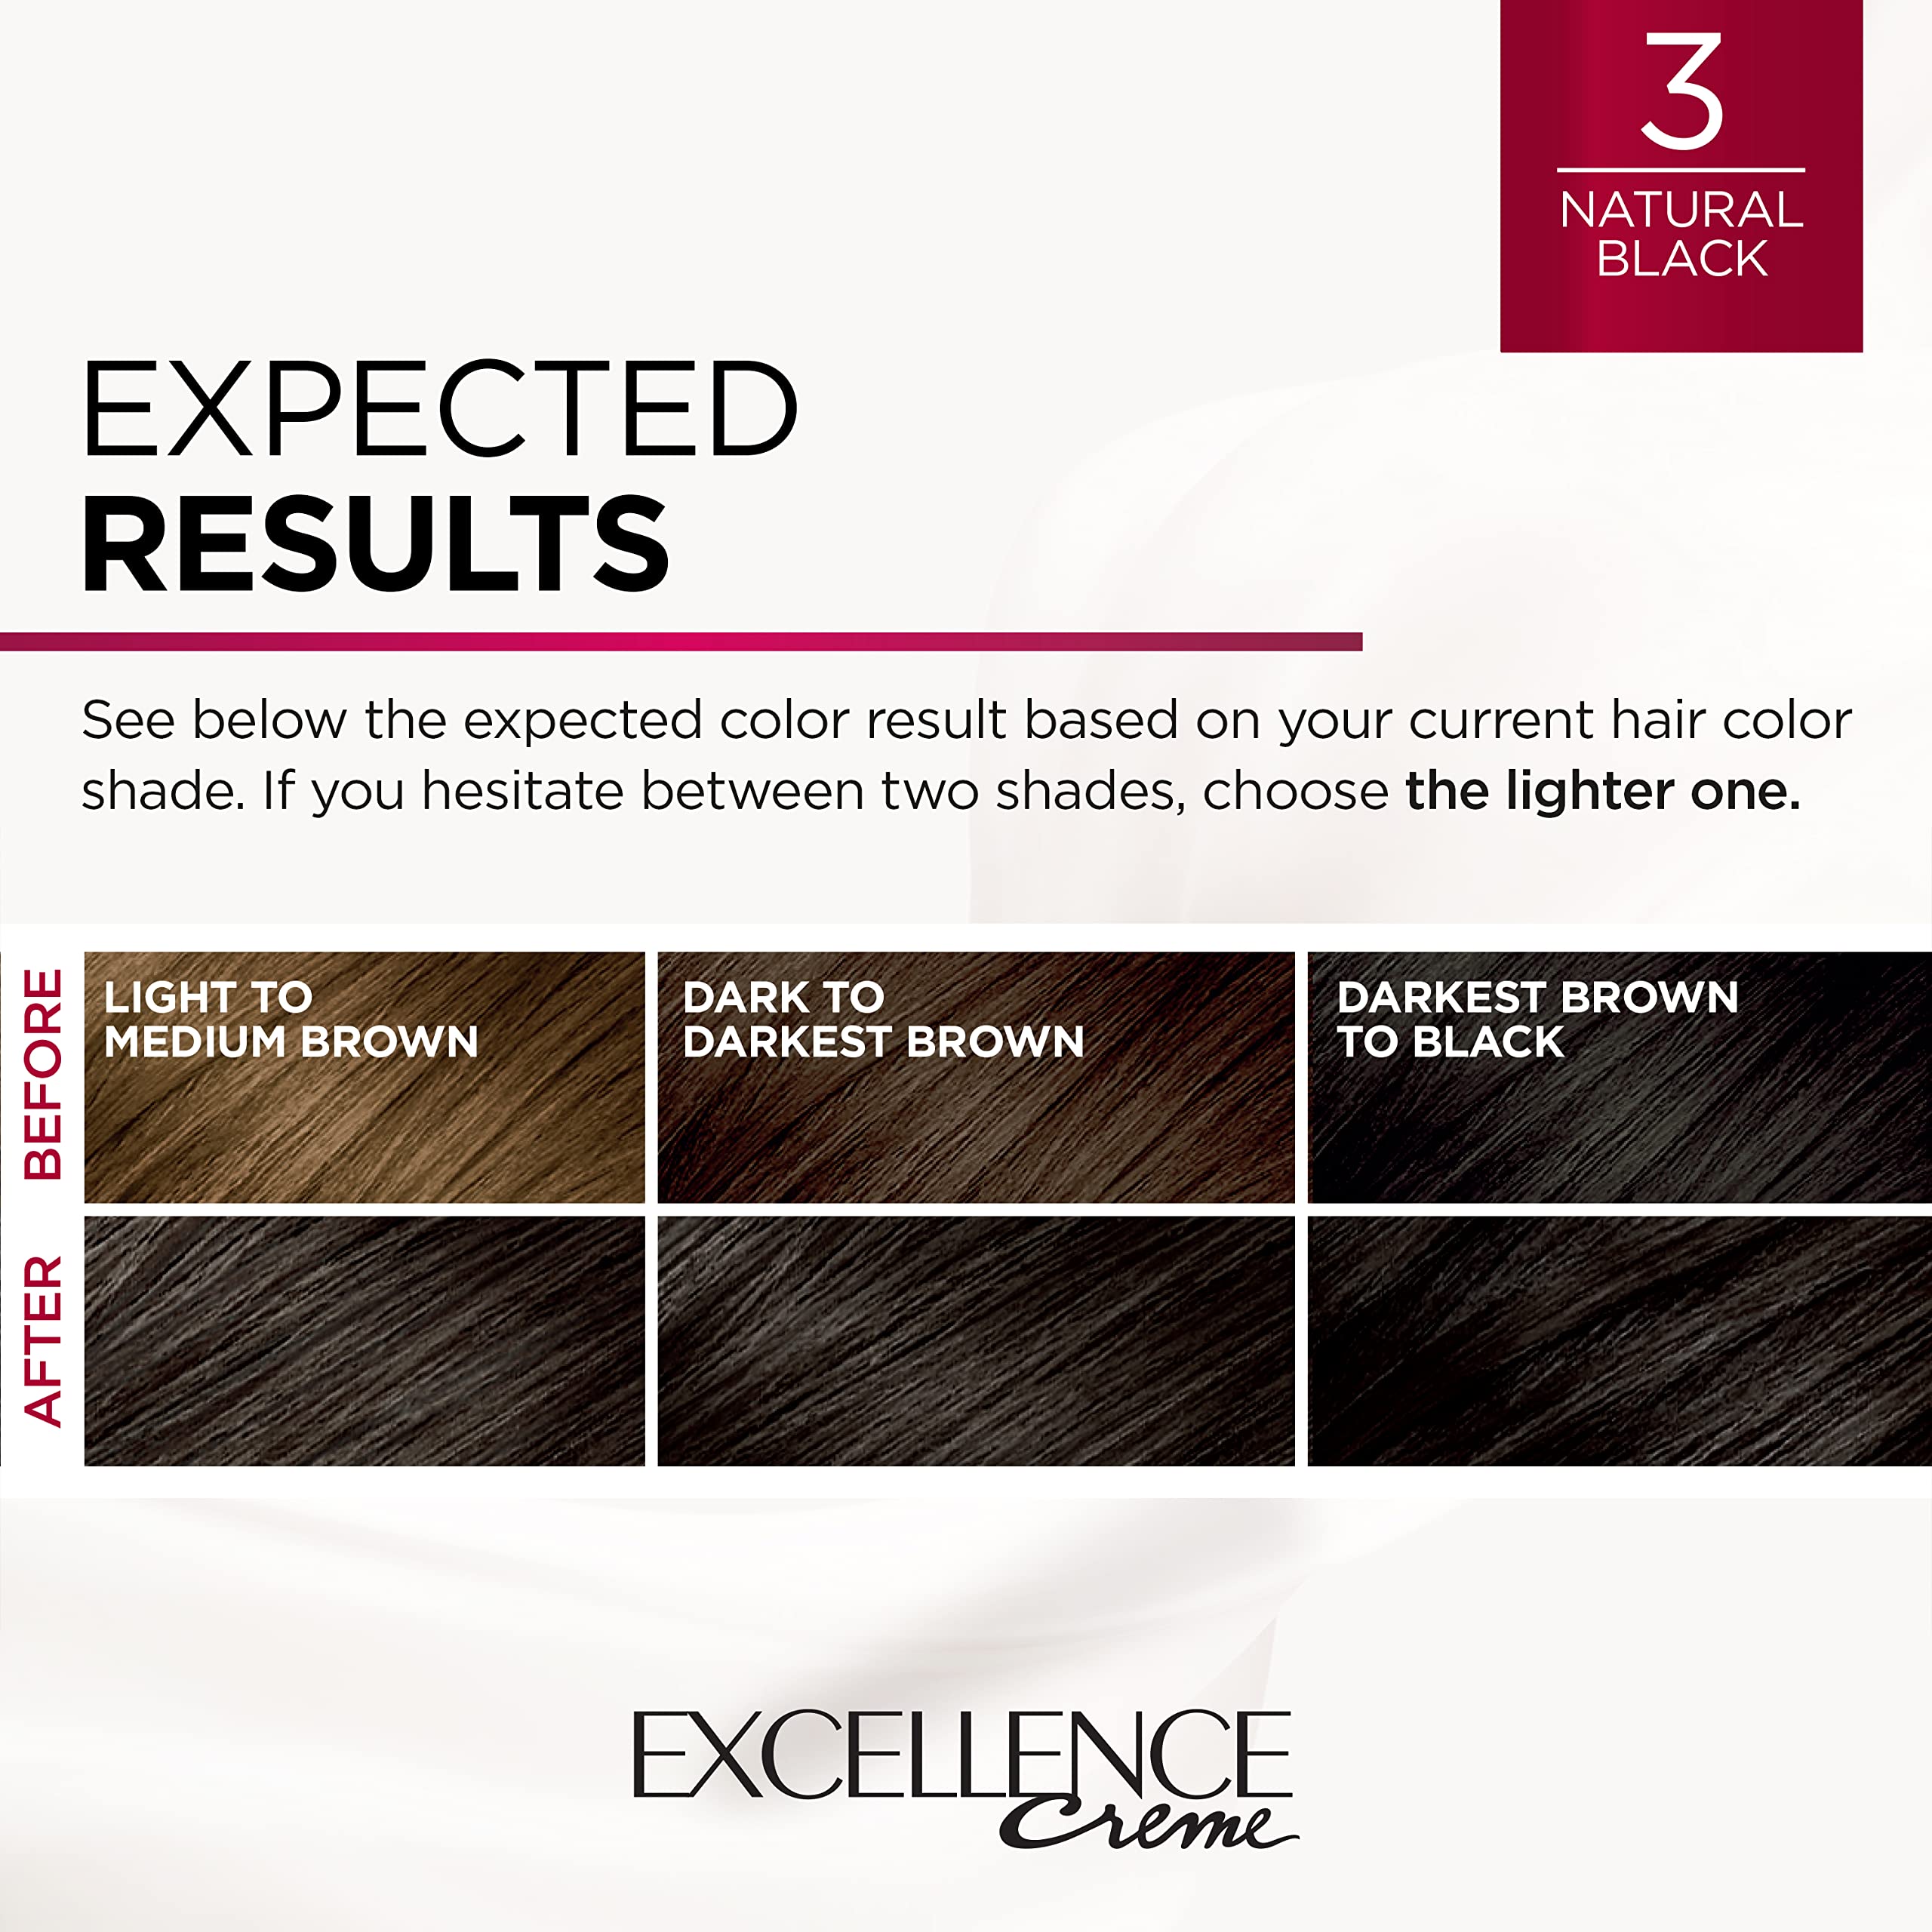 L'Oreal Paris Excellence Creme Permanent Hair Color, 3 Natural Black, 100 percent Gray Coverage Hair Dye, Pack of 2